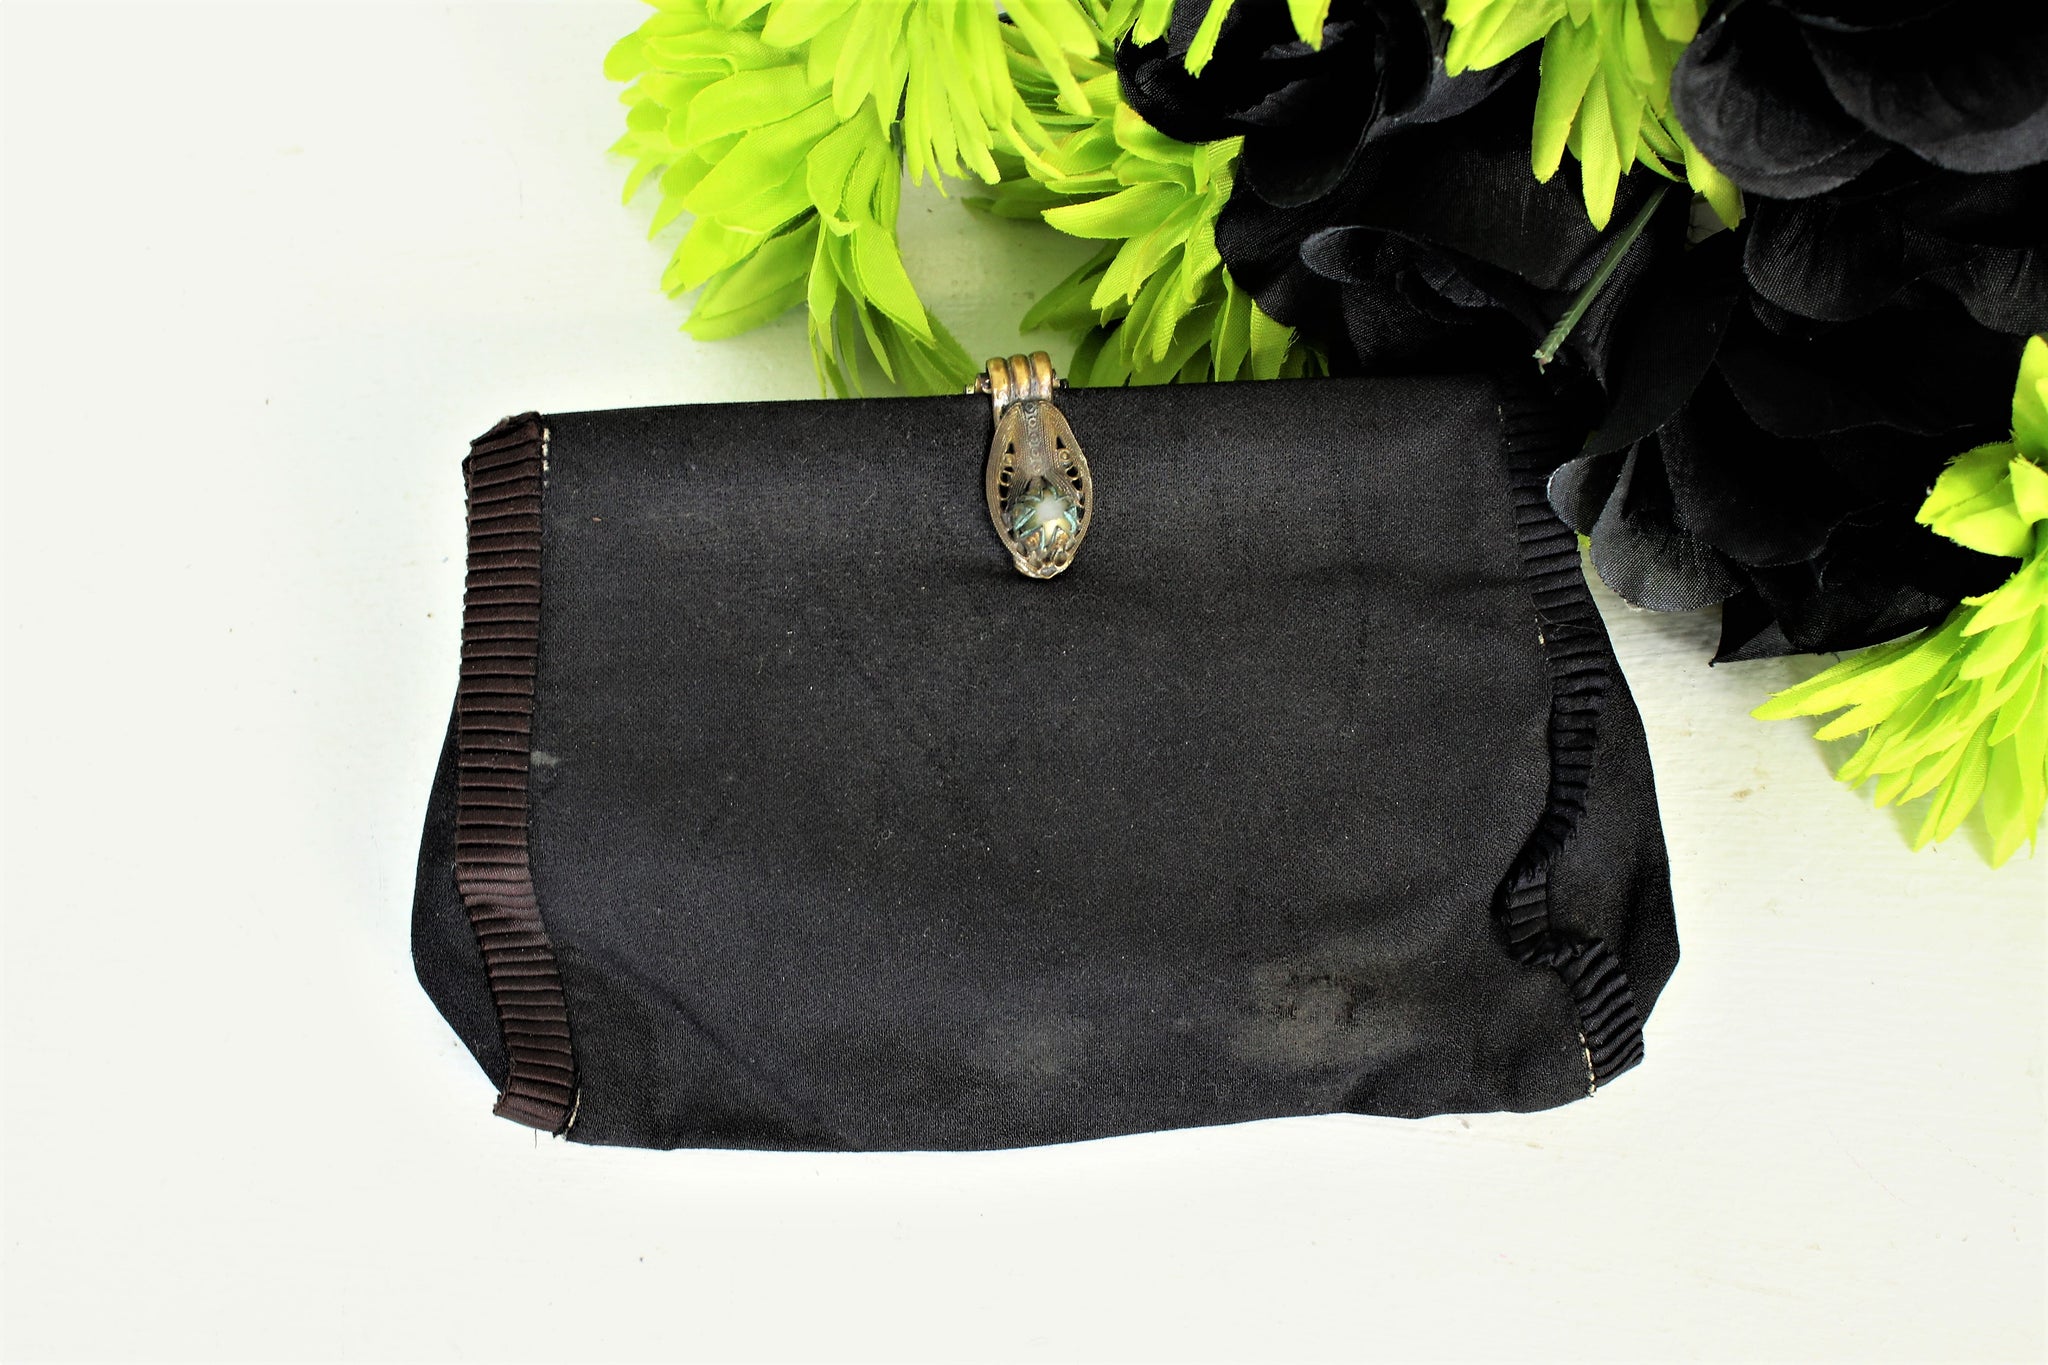 clutch bag with hand strap